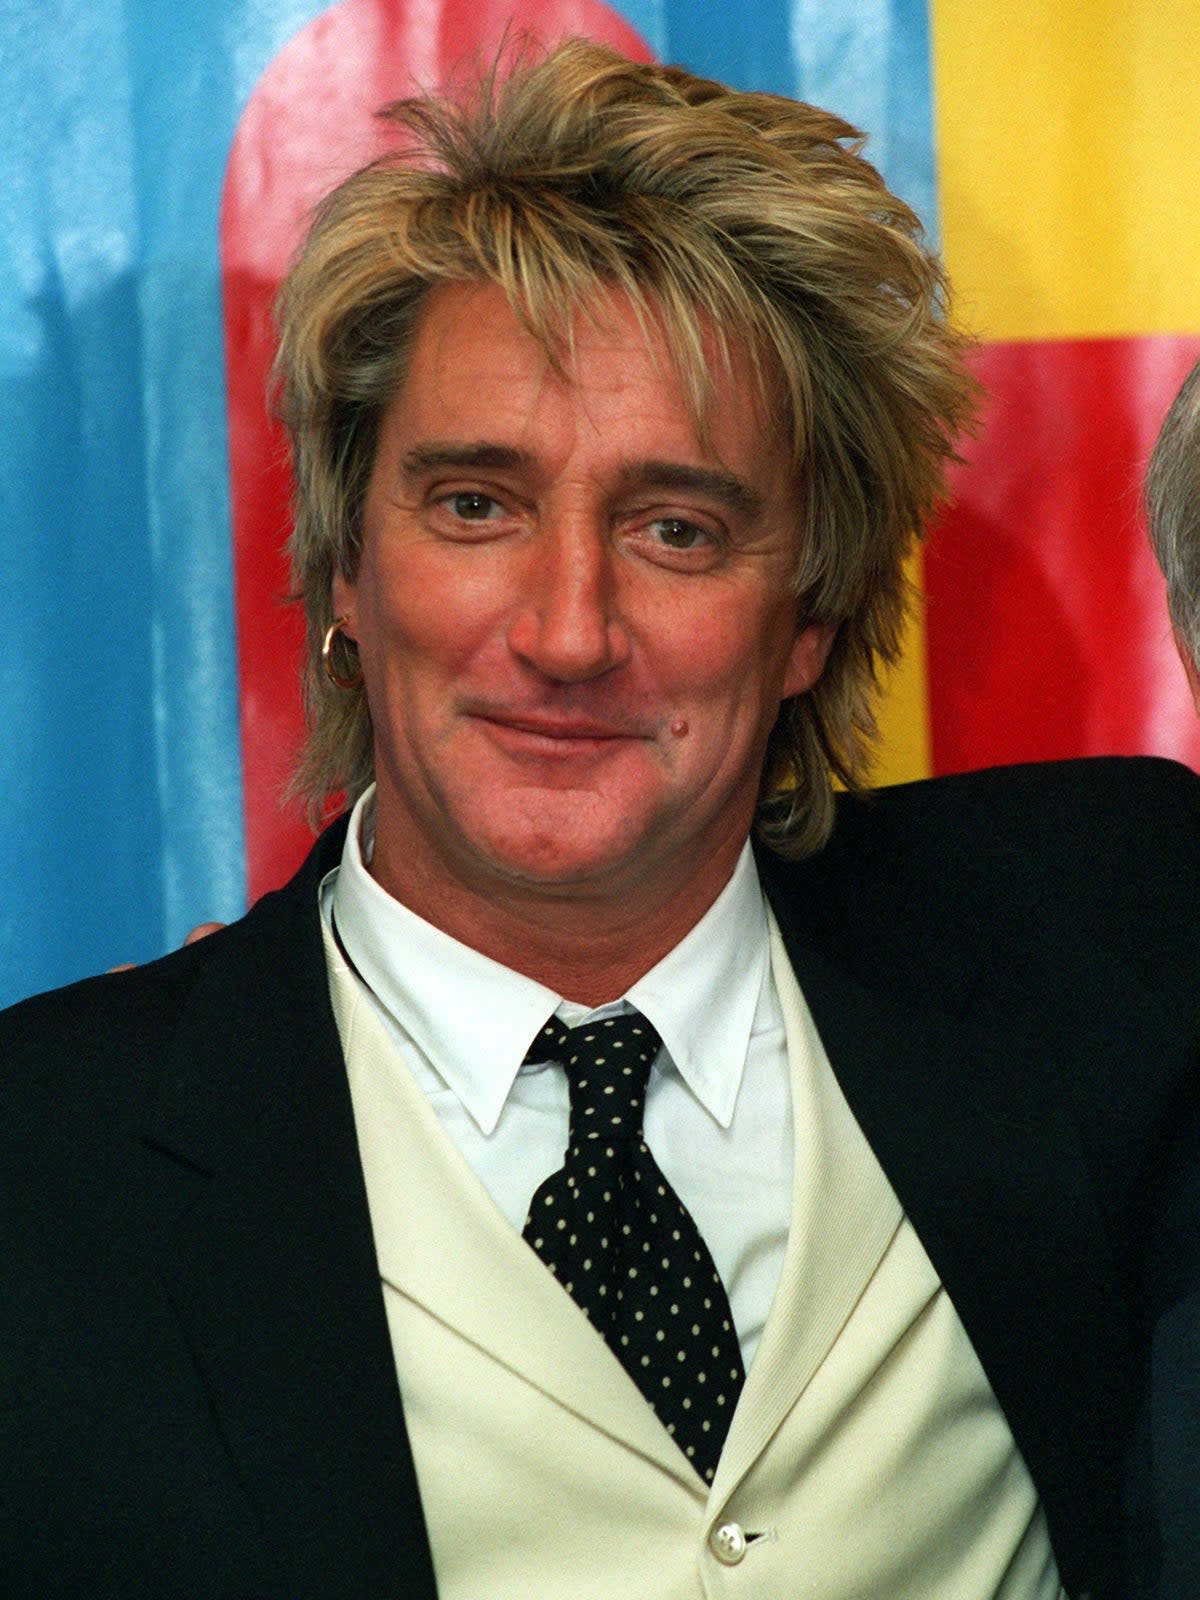 The study also saw Rod Stewart’s blow-dried masterpiece named the best celebrity mullet of all time (Oliver Berg/picture-alliance/Cov)